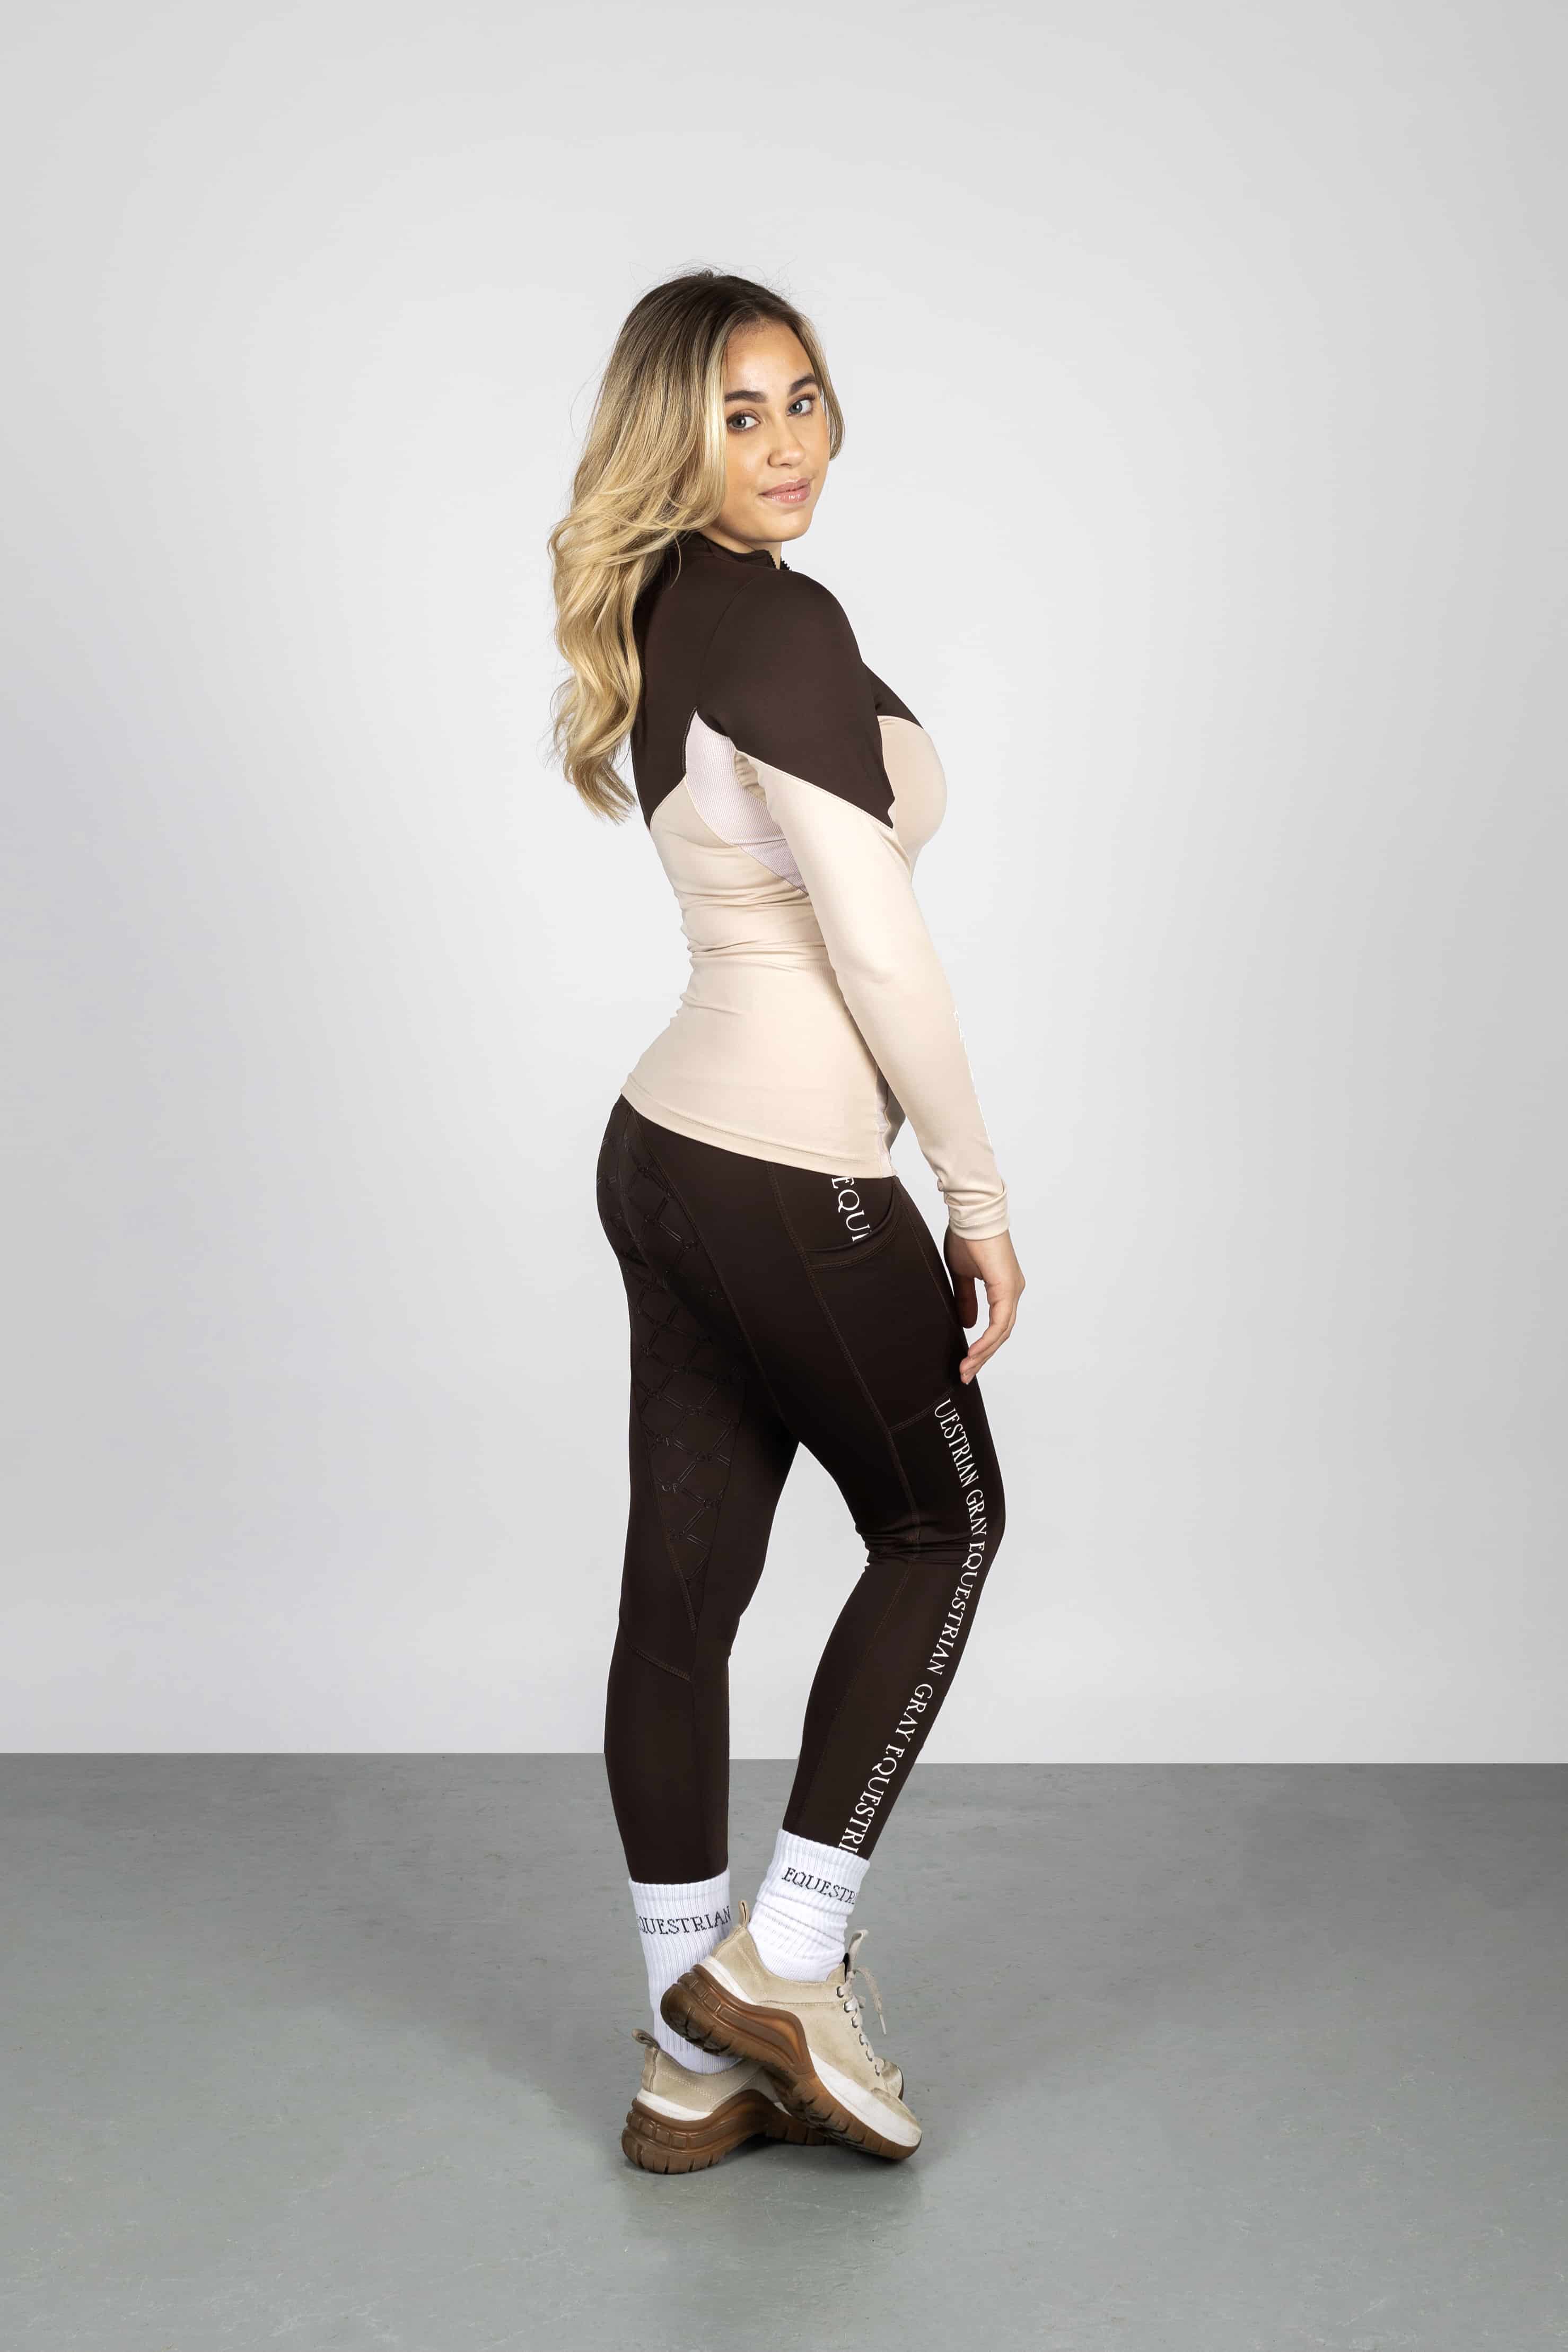 A model wearing our two toned base layer and brown riding leggings.